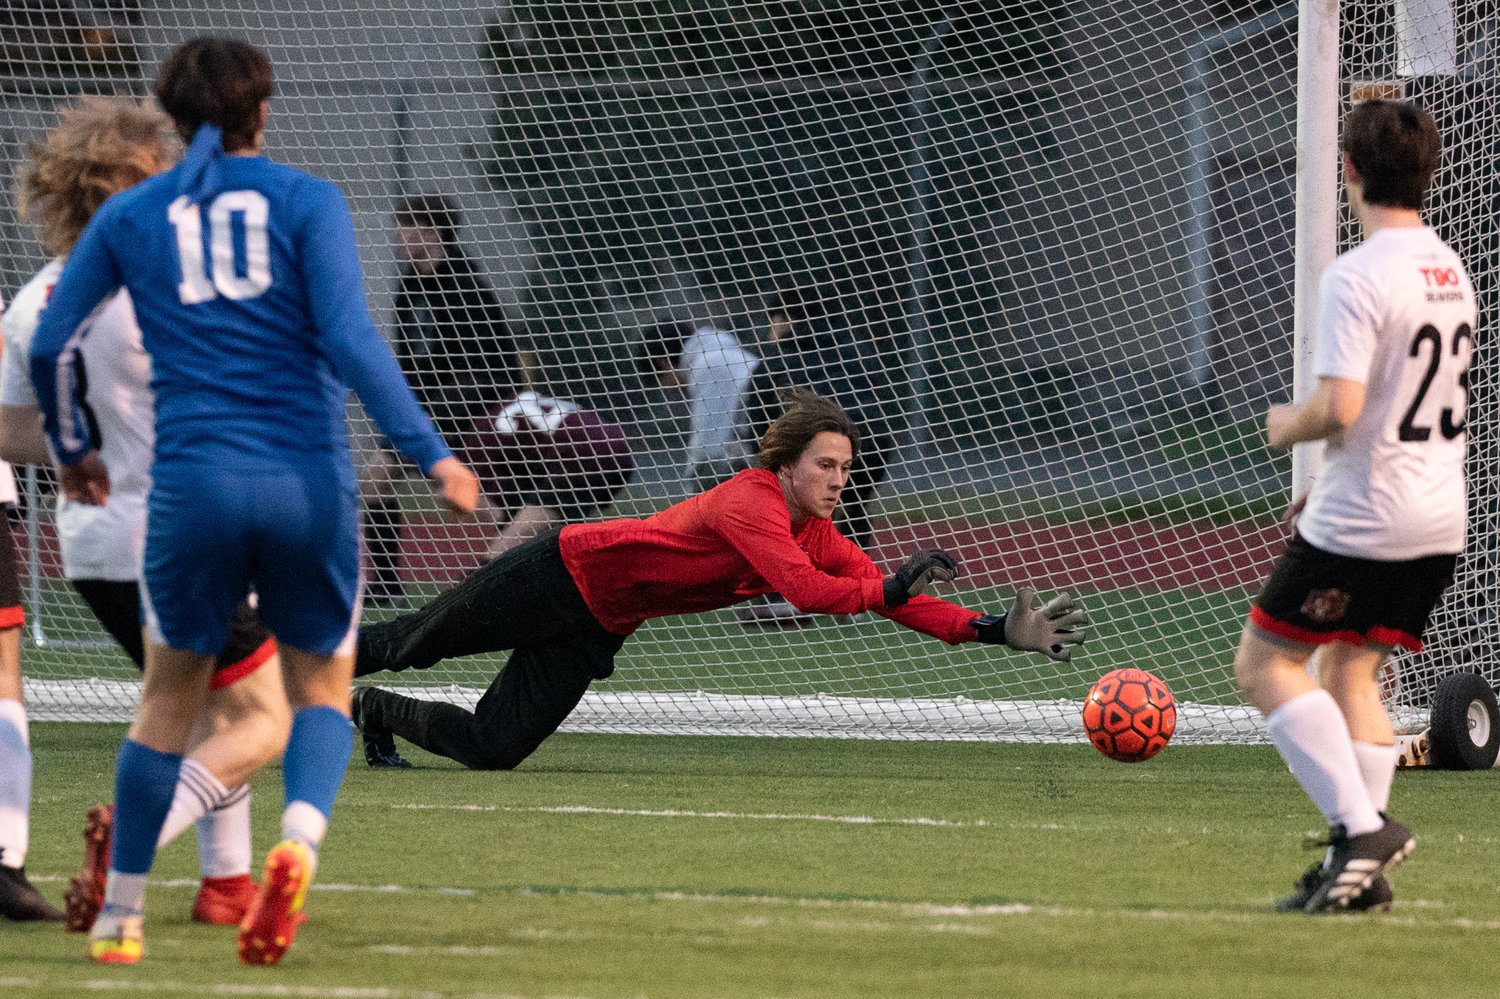 Tenino keeper Alex Reichelderfer stretches for a save against Rochester at the Centralia Jamboree March 10.